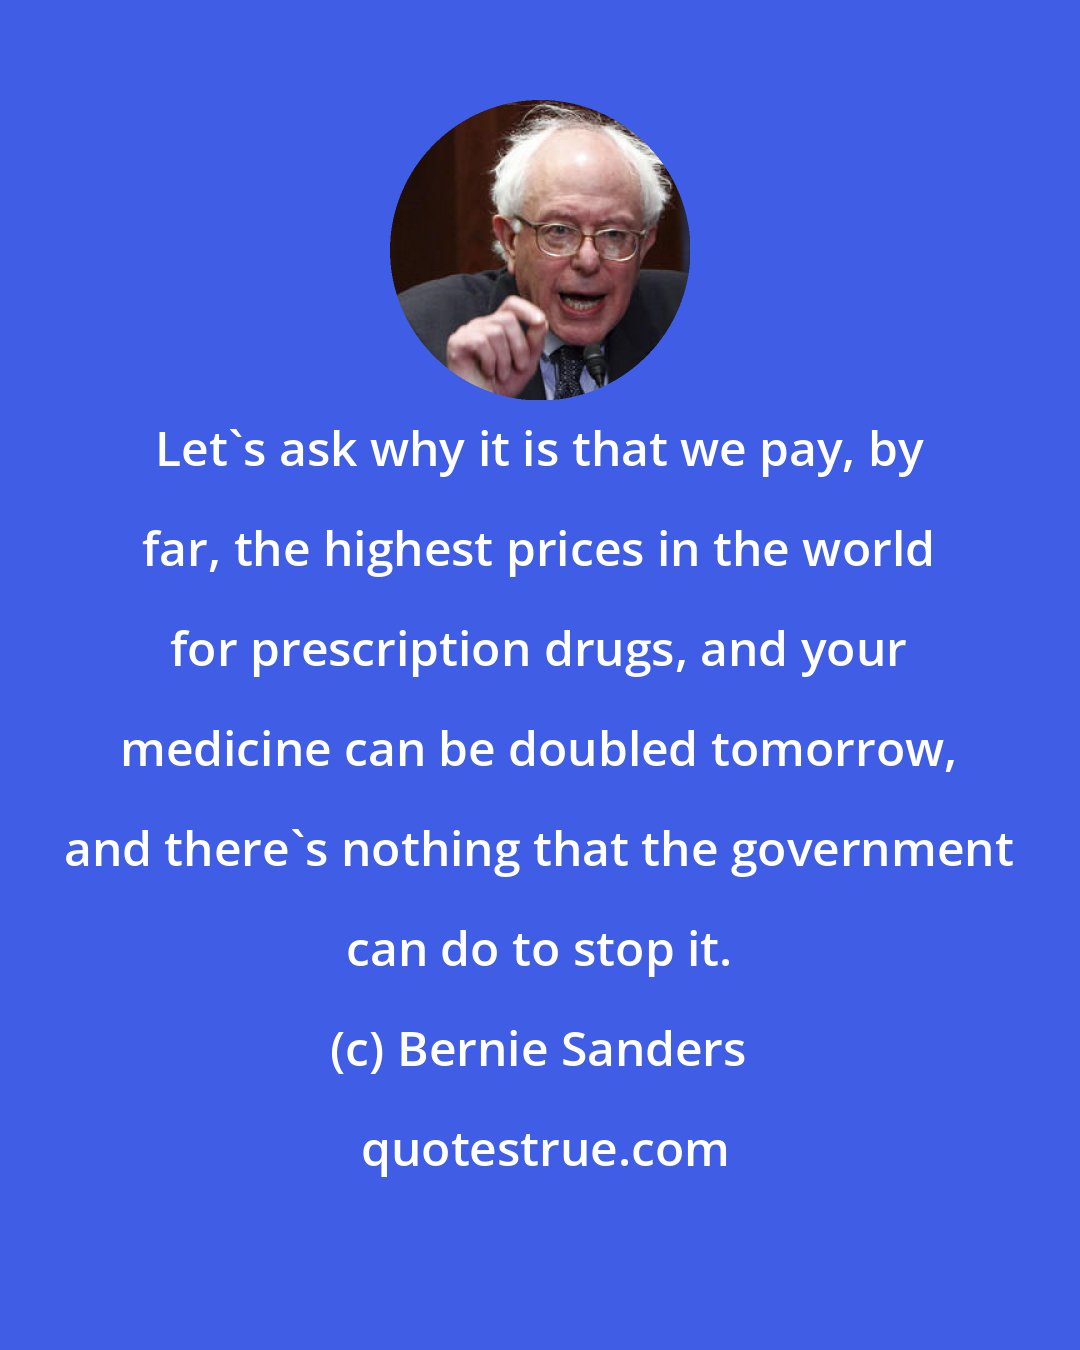 Bernie Sanders: Let's ask why it is that we pay, by far, the highest prices in the world for prescription drugs, and your medicine can be doubled tomorrow, and there's nothing that the government can do to stop it.